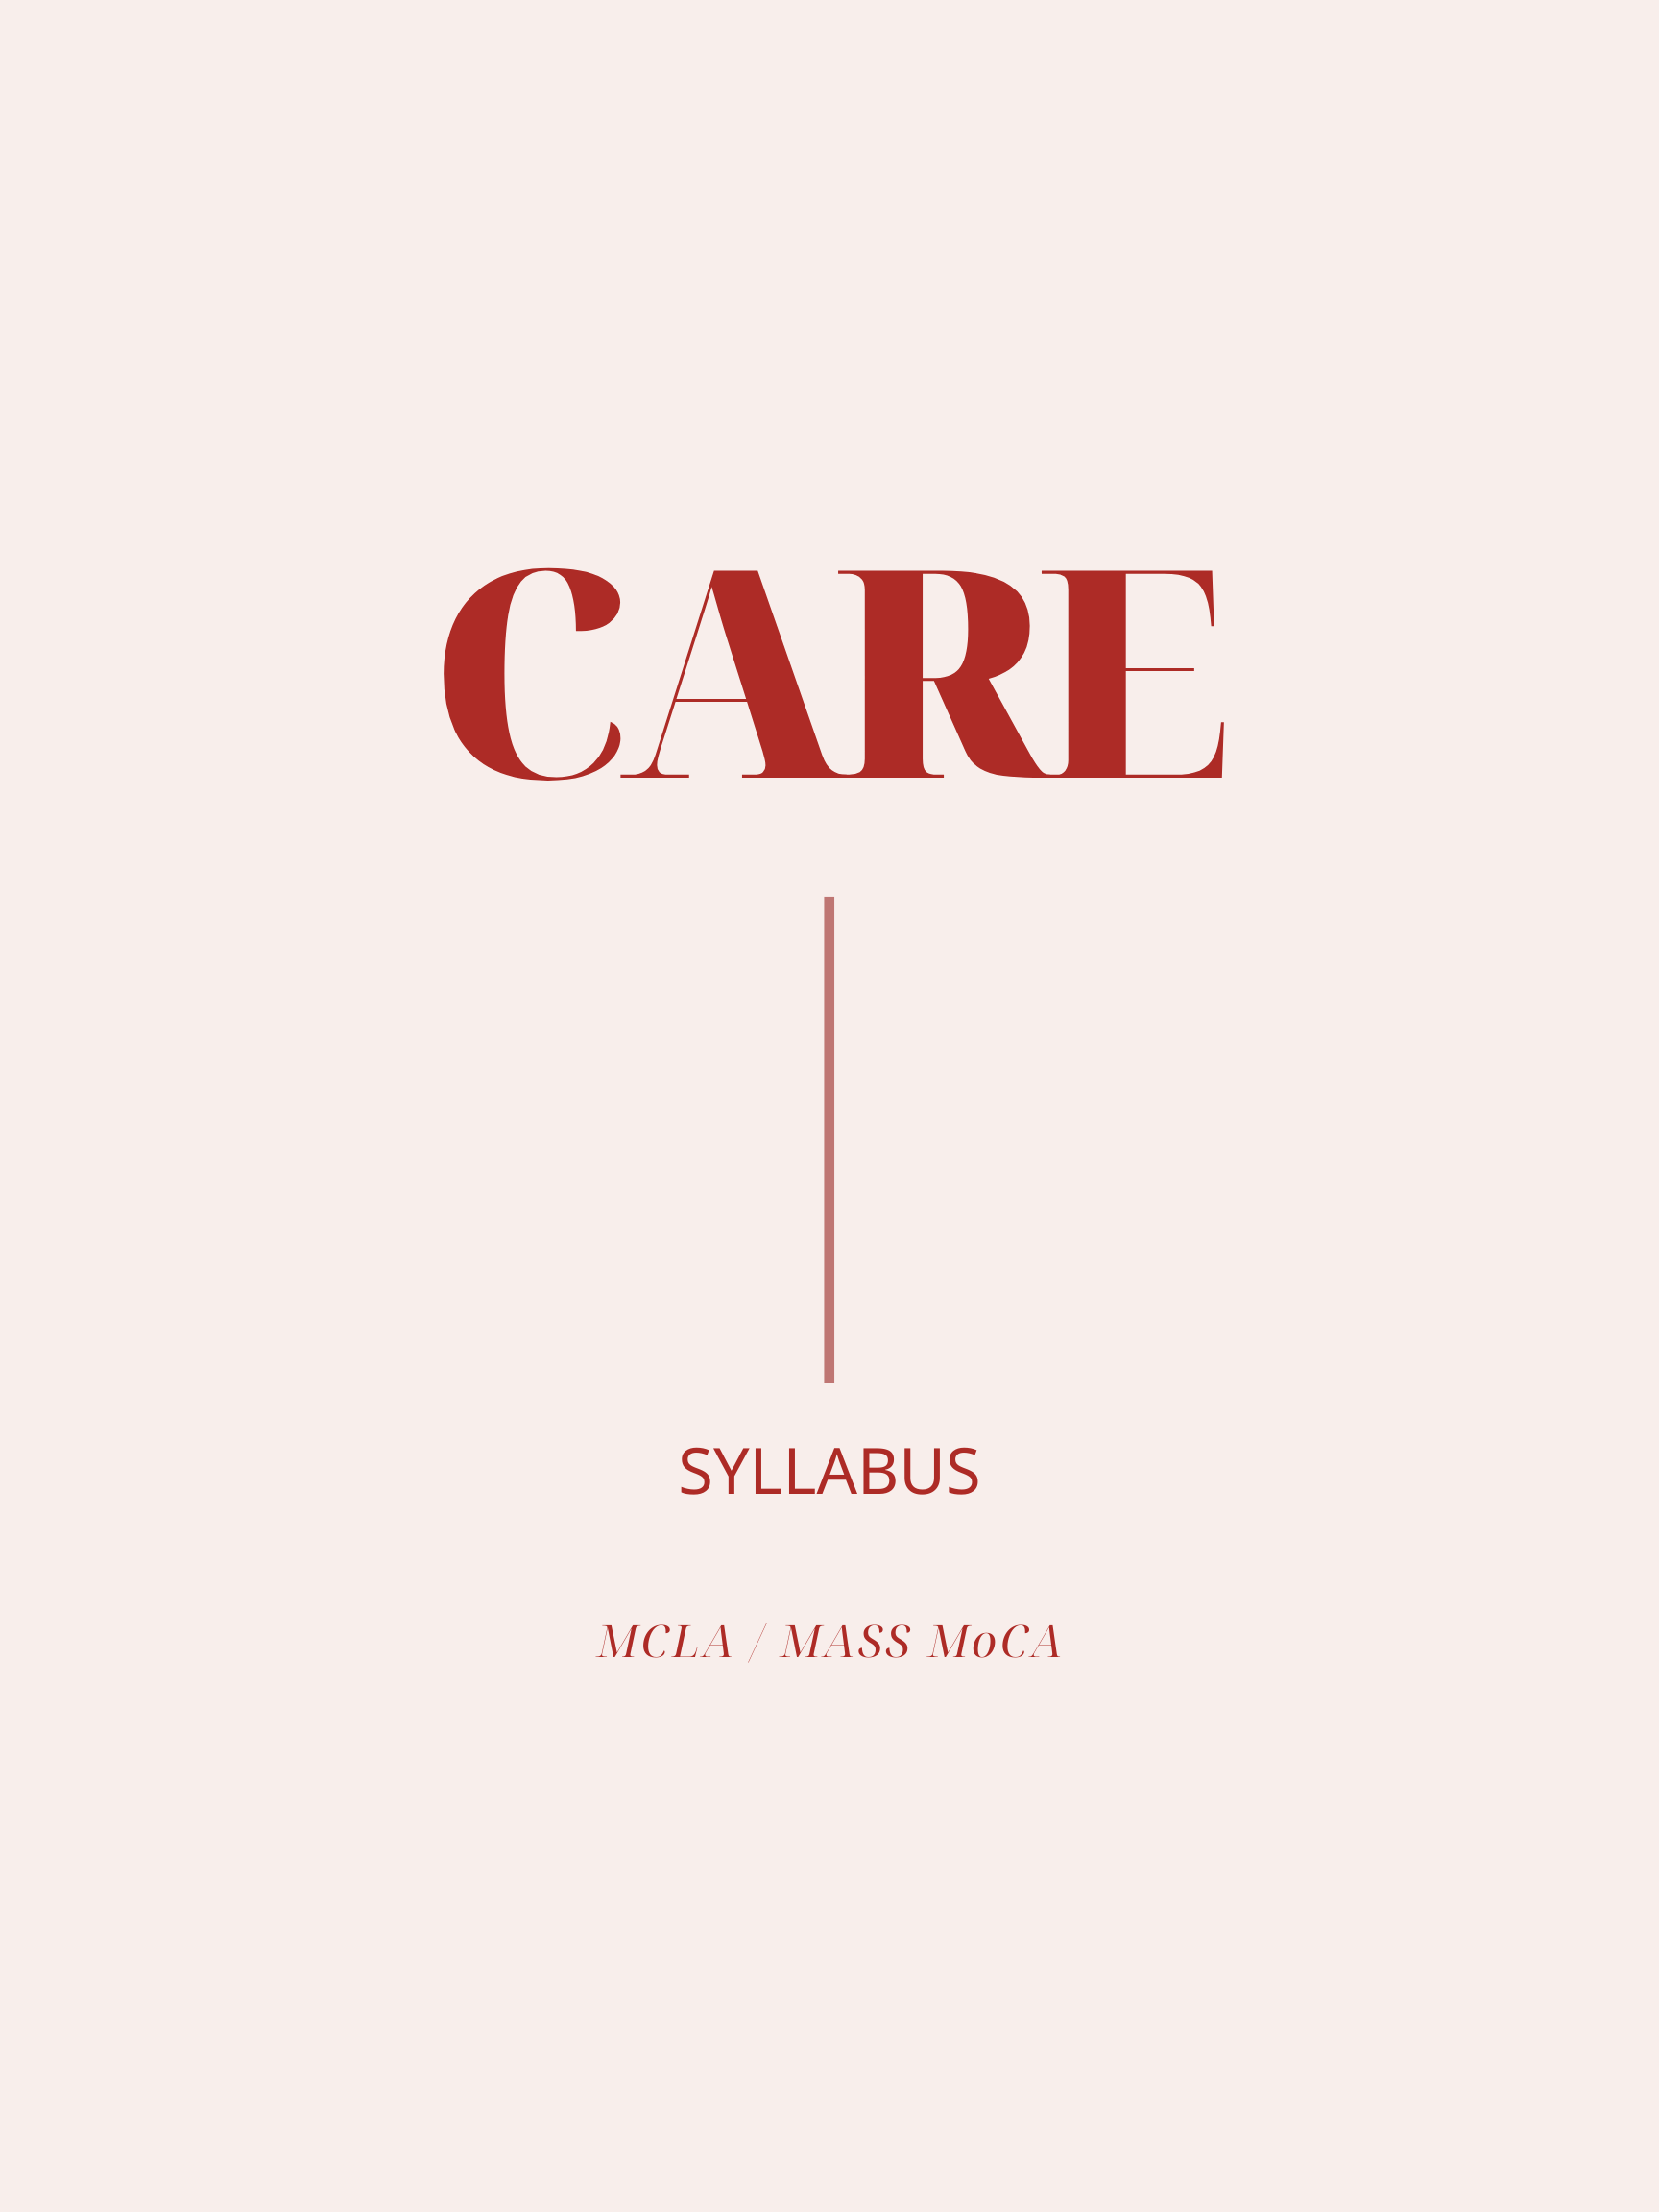 CARE SYLLABUS, a new justice-oriented public education and community resource, aims to explore the meaning and discourse around the concept of care through a multi-modal website with curated modules, original text, media, recordings, and virtual live events.